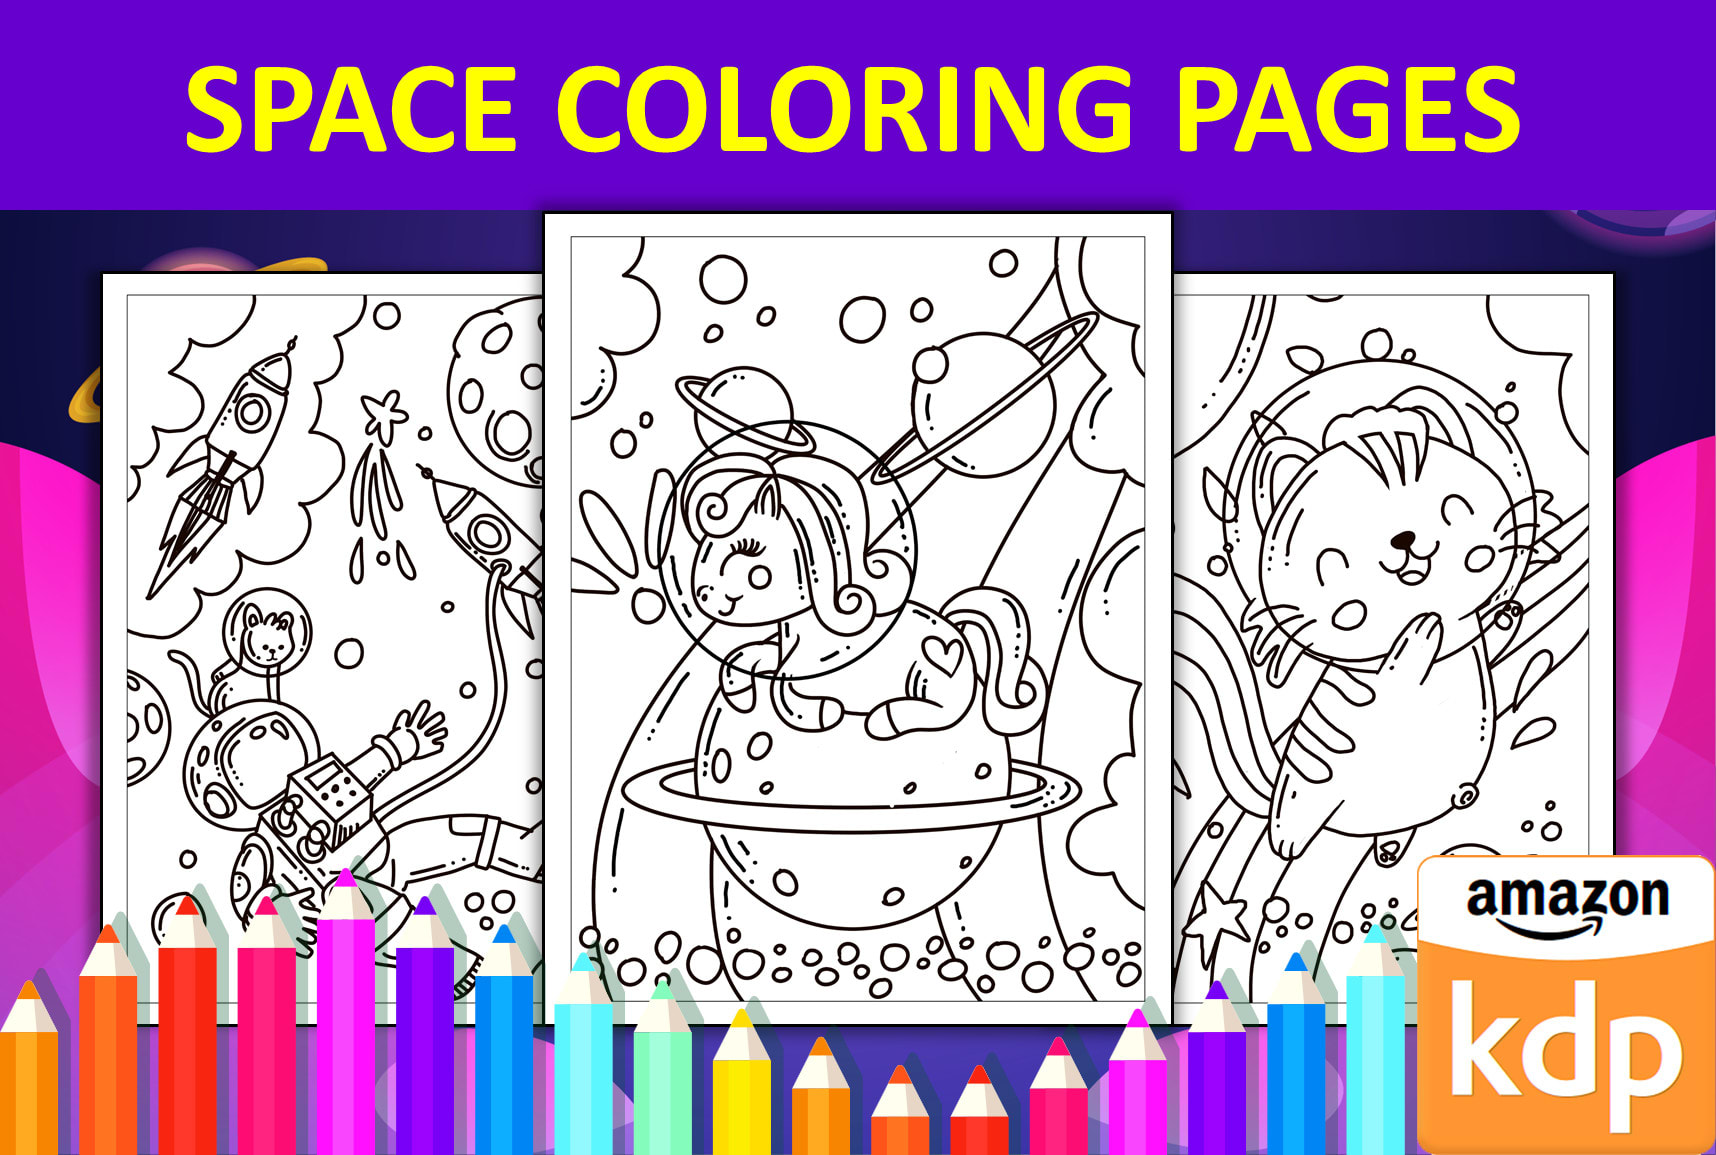 Download Give You 20 Printable Space Coloring Book Pages For Amazon Kdp Or Coloring App By Victoria Unique Fiverr